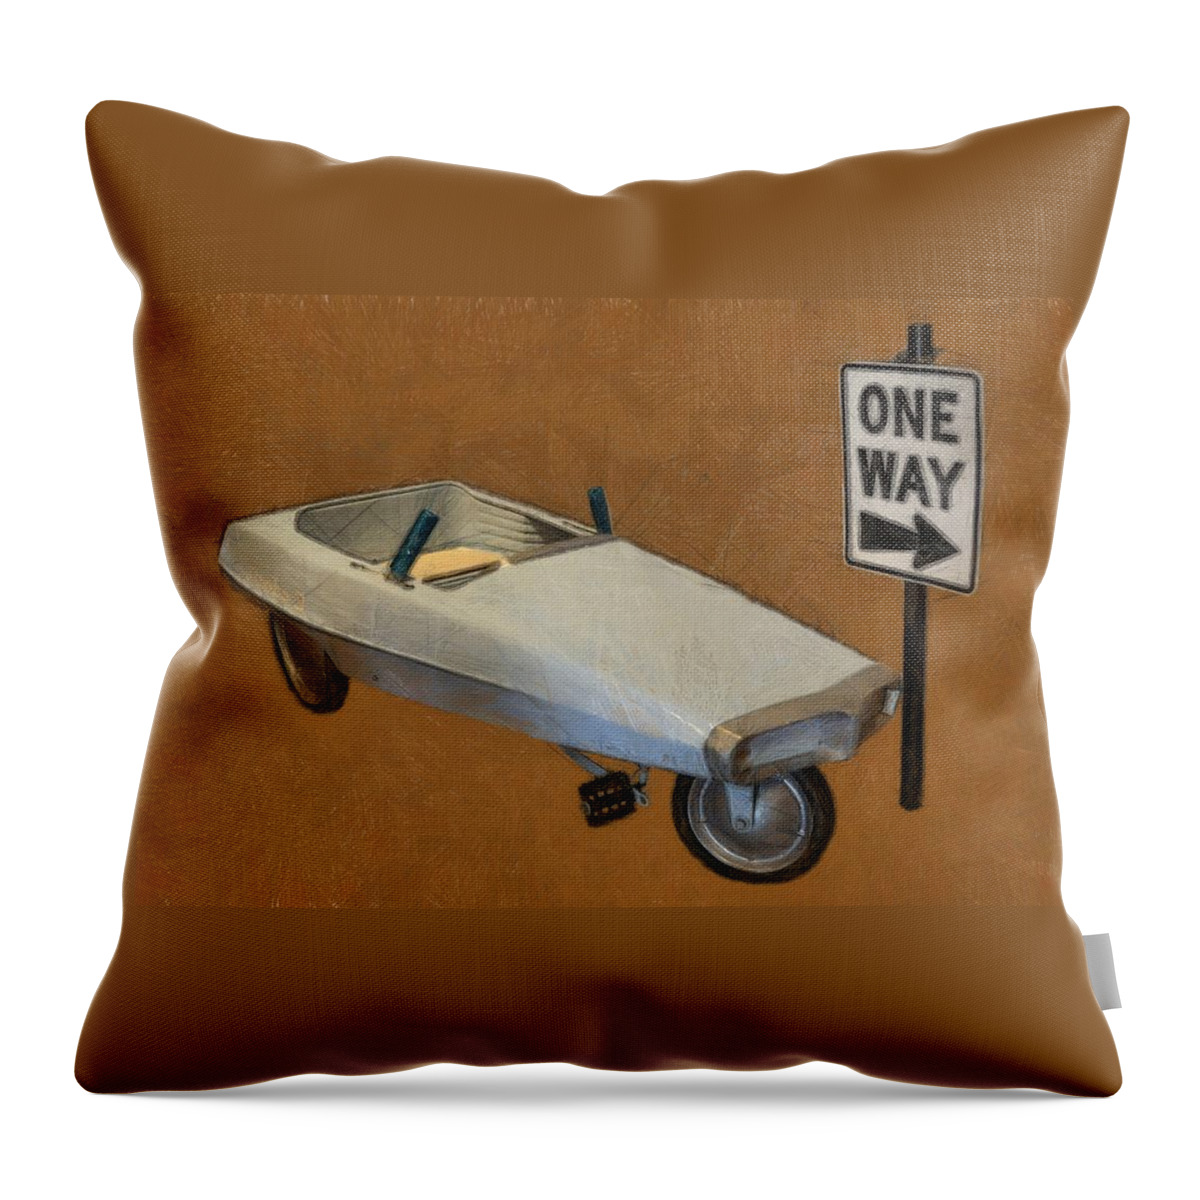 Steering Wheel Throw Pillow featuring the photograph One Way Pedal Car by Michelle Calkins